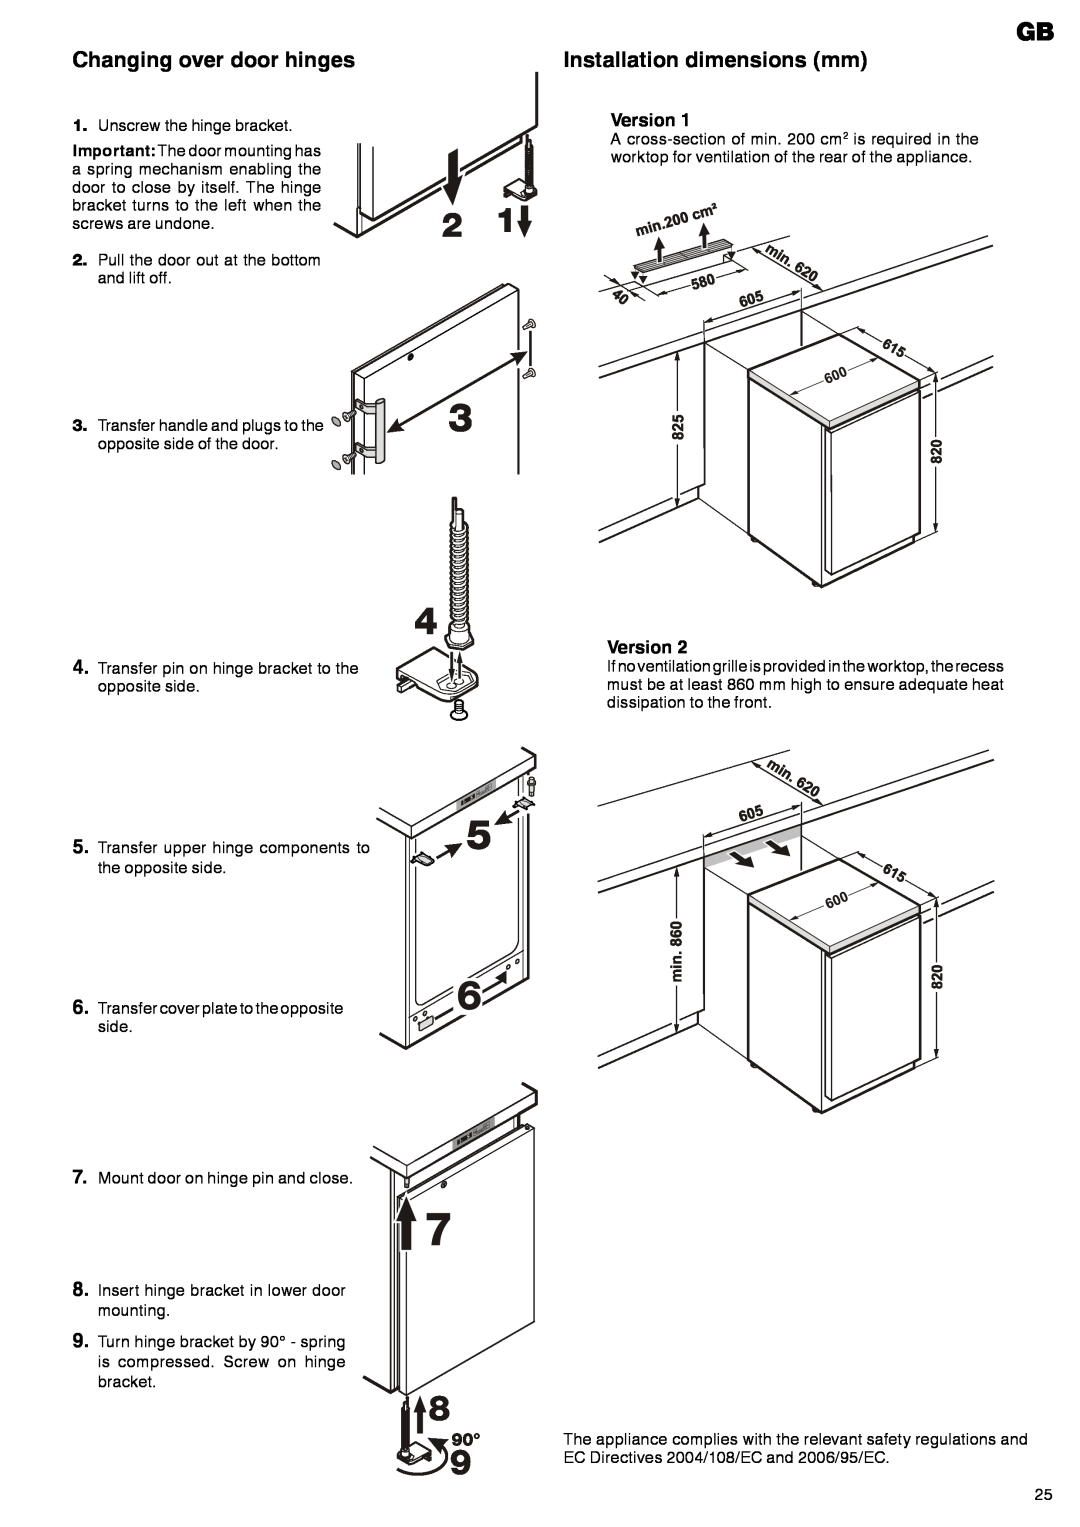 Liebherr 7083 247-00 operating instructions Changing over door hinges, Installation dimensions mm, Version 